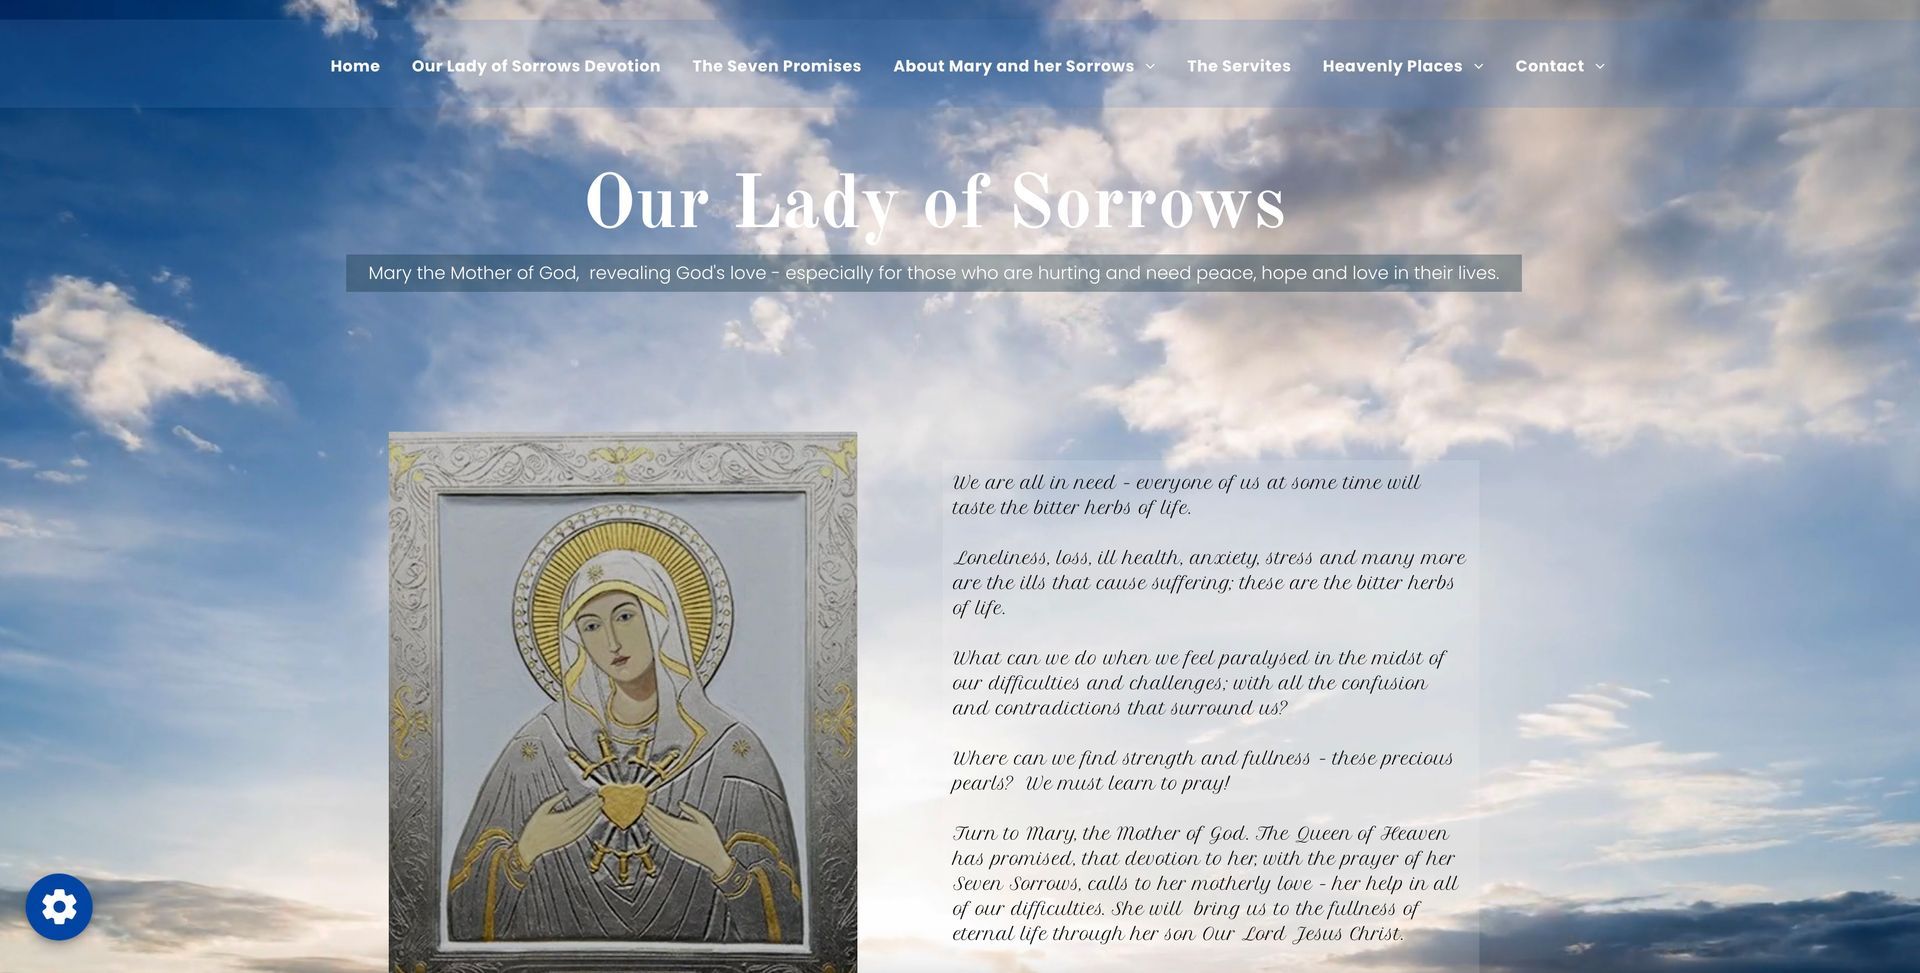 A screenshot of a website for our lady of sorrows.